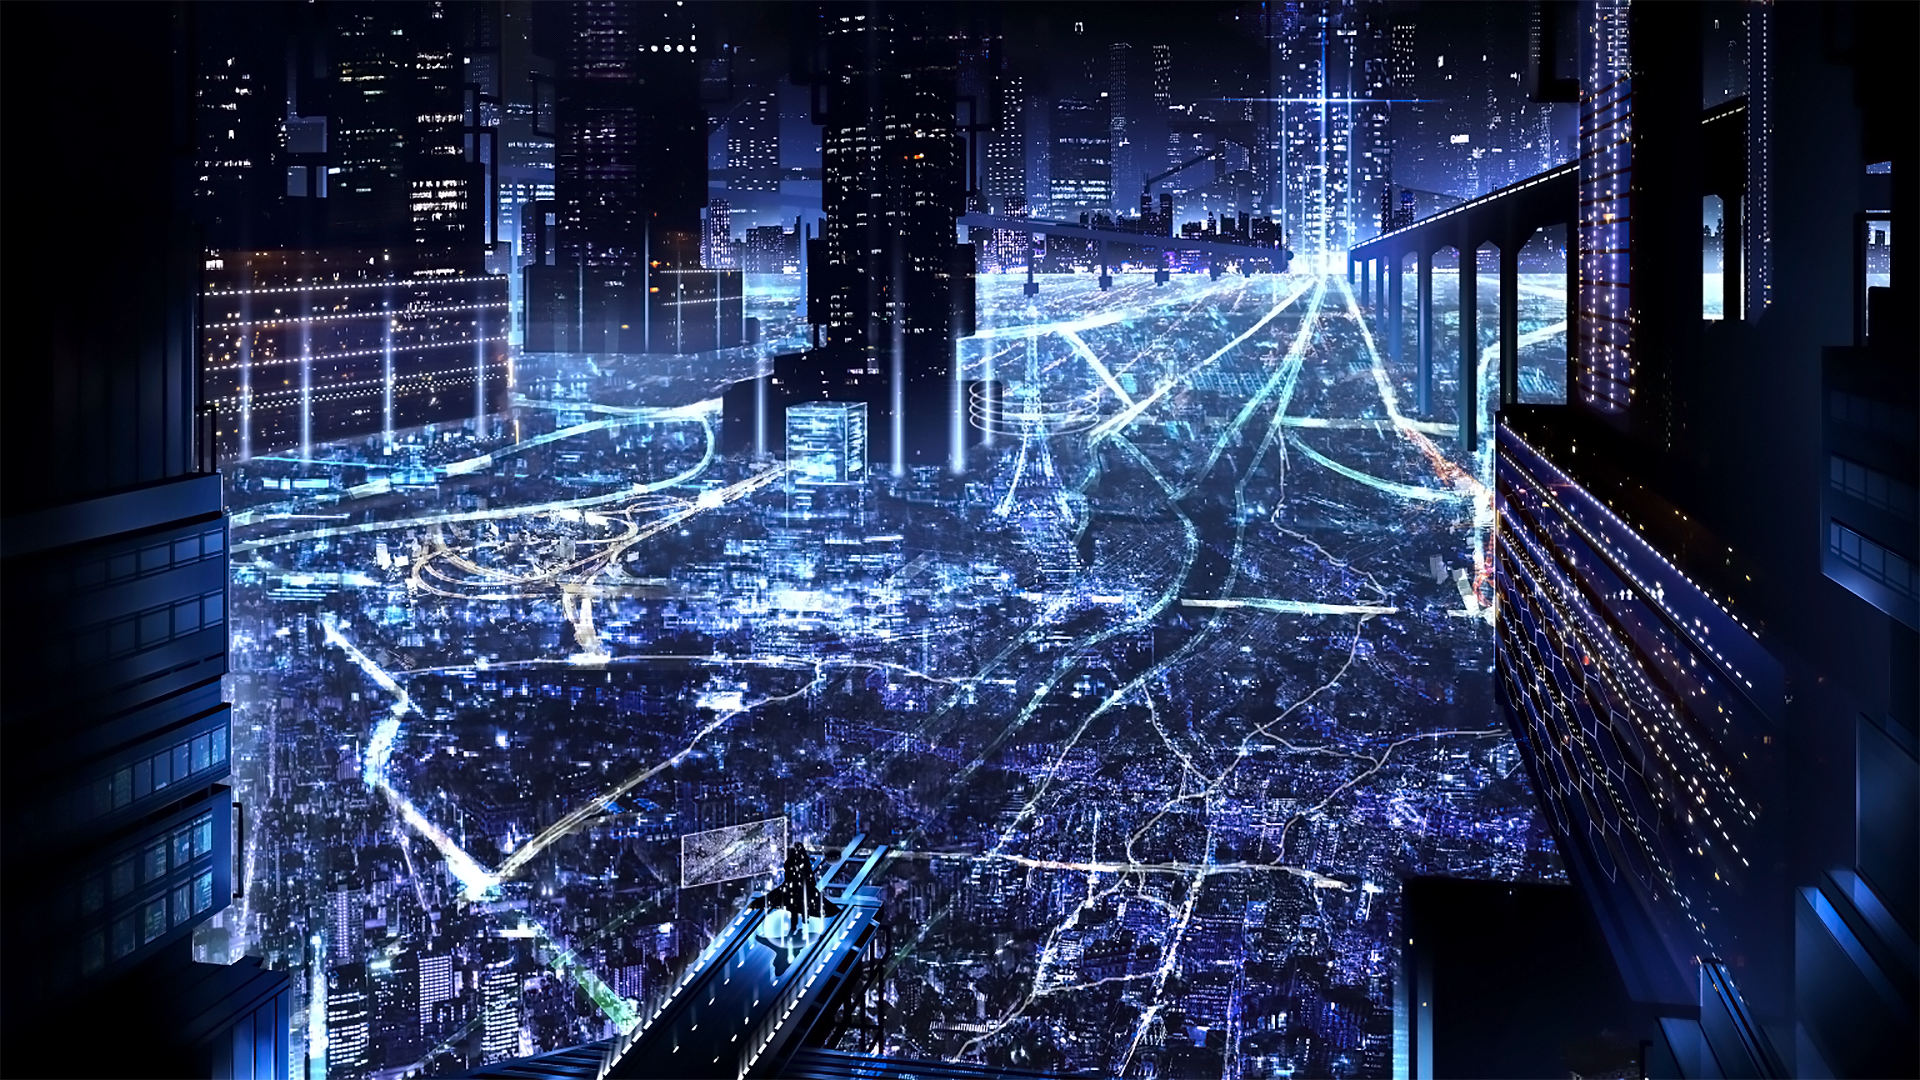 Anime city at night painting girl wallpaper  1920x1200  1015206   WallpaperUP